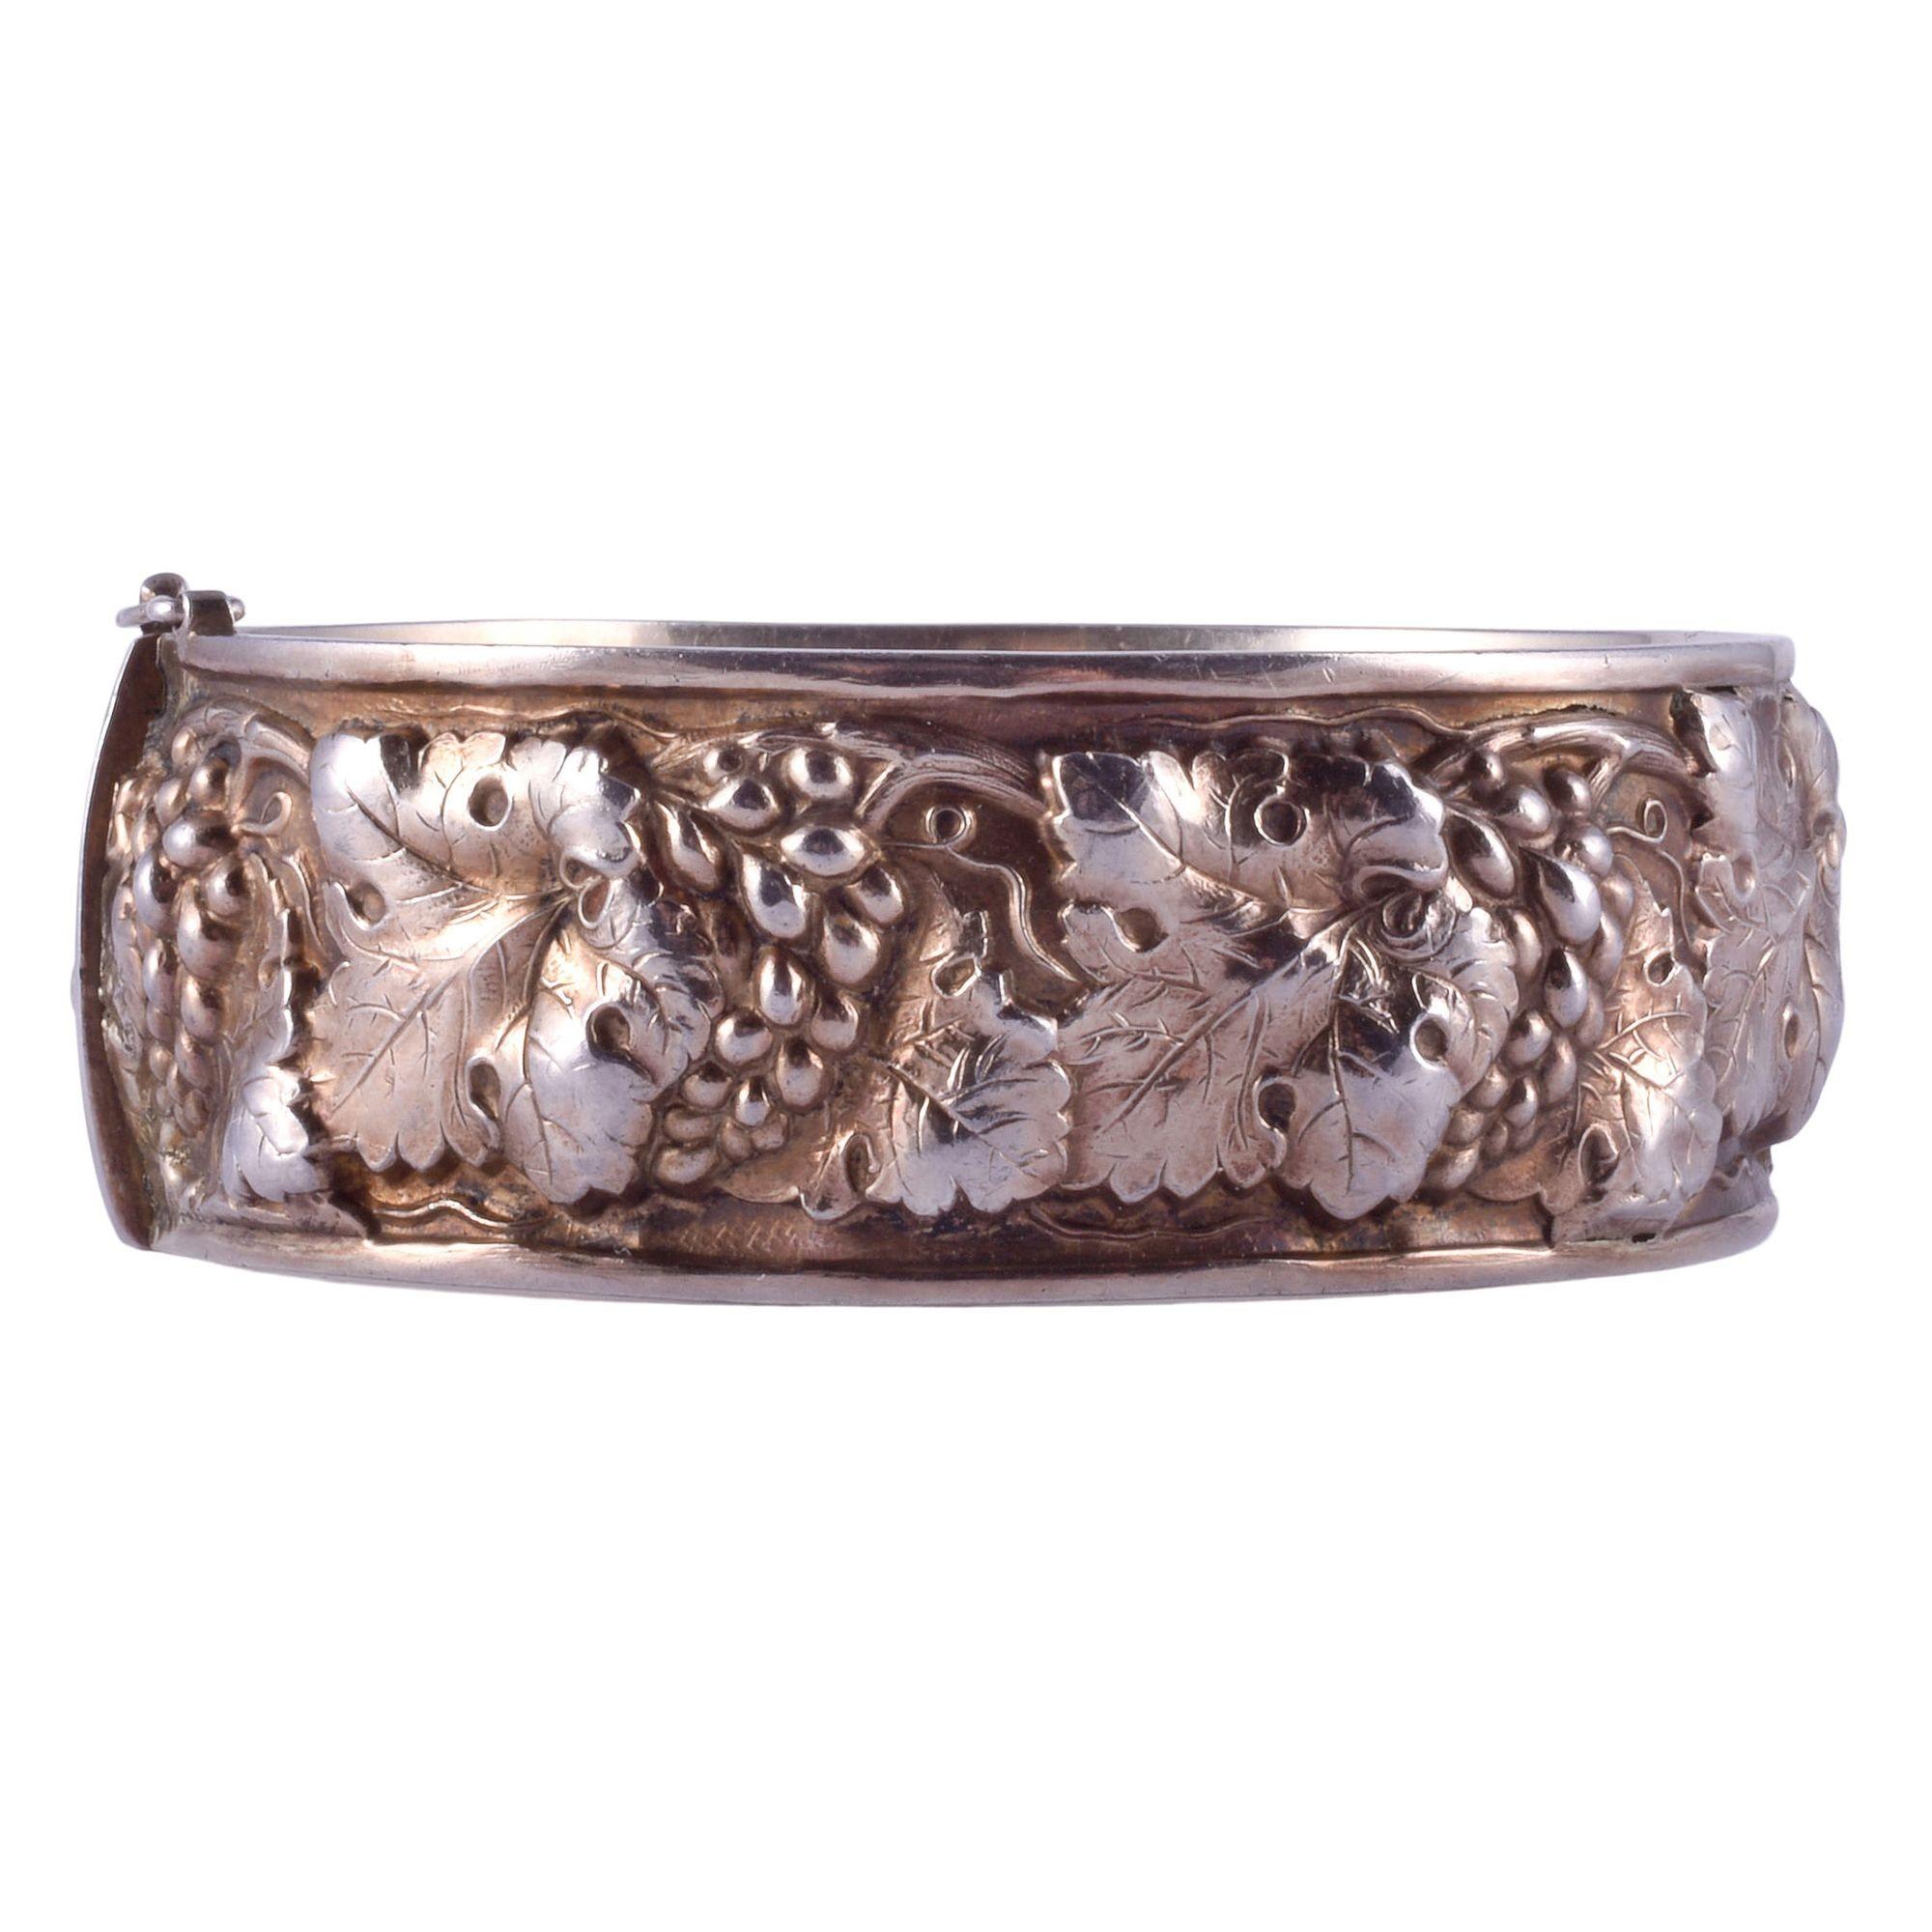 Estate grape vine motif sterling silver hinged bangle bracelet. This bracelet is crafted in sterling silver and marked 925. The high relief grape vine motif continues all the way around this hinged bangle bracelet. This sterling silver bracelet